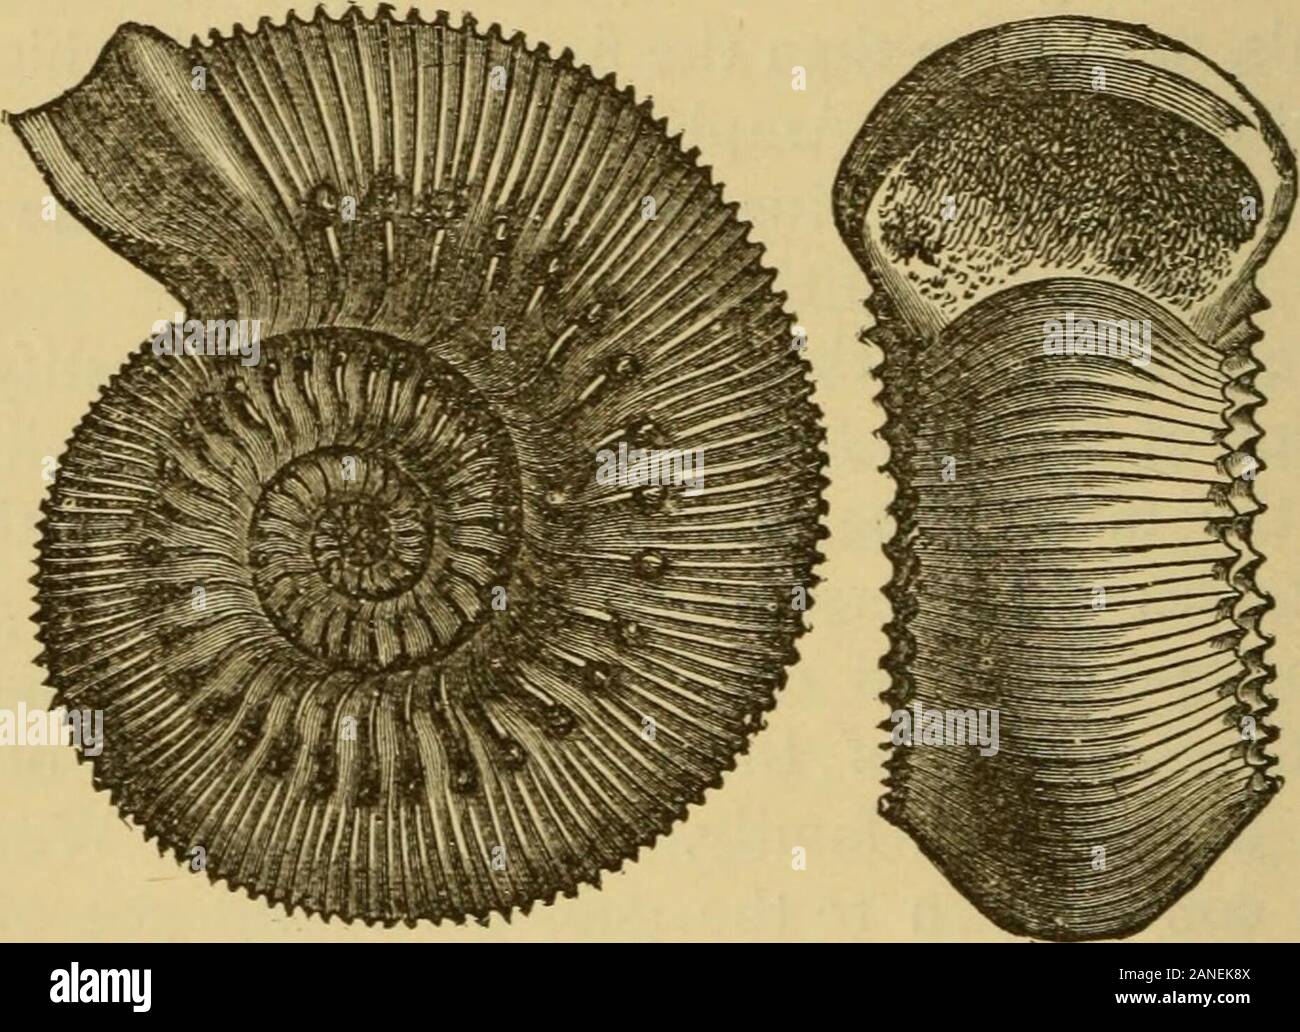 The doctrine of descent and Darwinism . es to the two families of Ammonites, thePlanulata and Armata ; of which, according to Wiirten-bergers researches, the latter are developed from theformer, as the ribs of the Planulata gradually pass intothe spines of the Armata. Of special interest to us arethe following passages of the preliminary communicationon the discoveries obtained from thousands of specimens,and which will probably not be made public, with all thevouchers, for some years to come. It gave me parti- 214 THE DOCTRINE OF DESCENT. cular pleasure, says Wurtenberger, when, after diversc Stock Photo